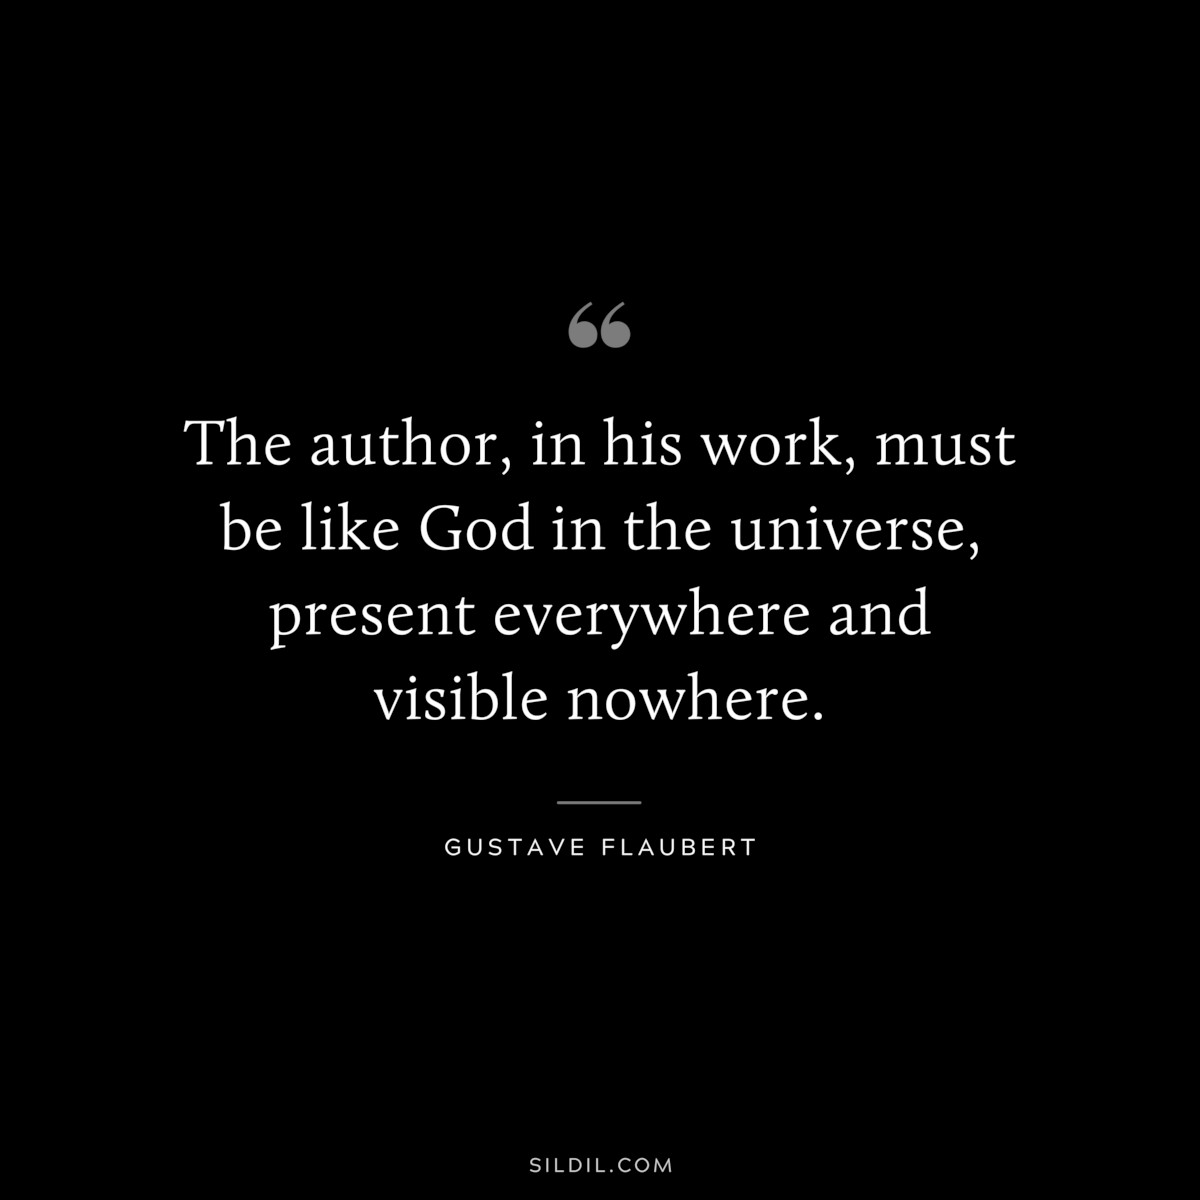 The author, in his work, must be like God in the universe, present everywhere and visible nowhere. ― Gustave Flaubert